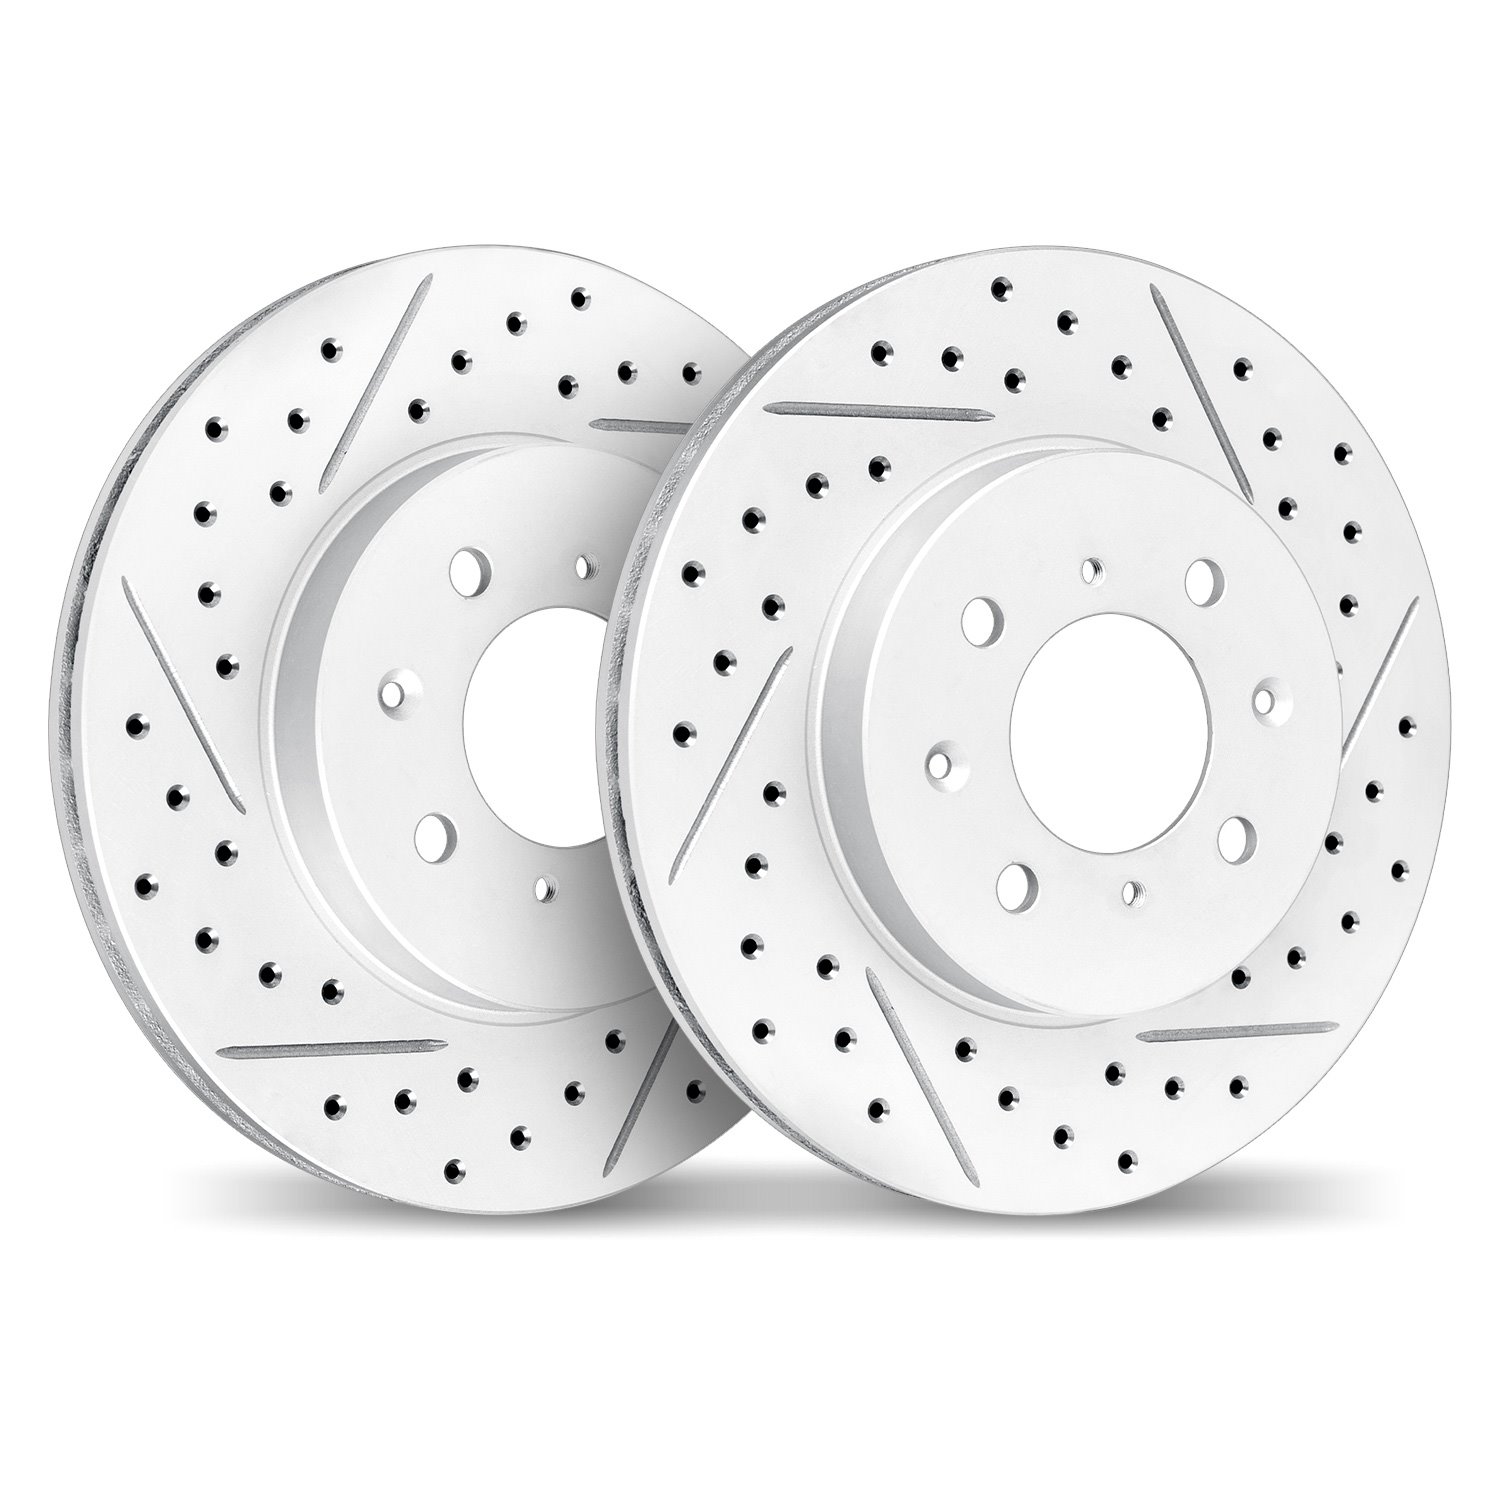 2002-54083 Geoperformance Drilled/Slotted Brake Rotors, 2008-2011 Ford/Lincoln/Mercury/Mazda, Position: Front